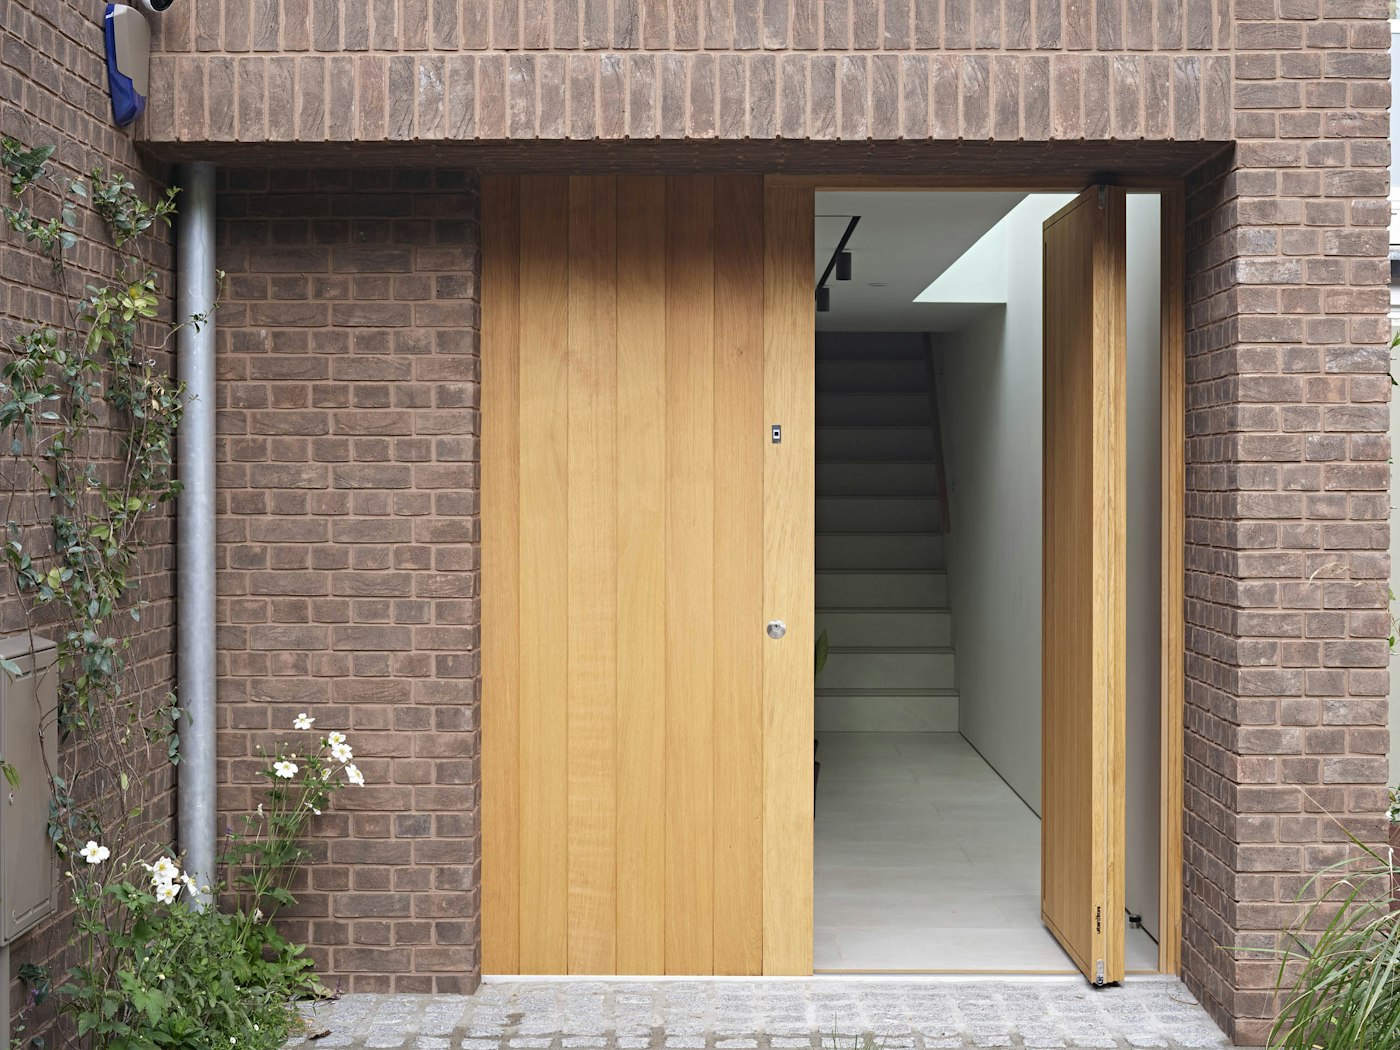 And the matching interior/exterior wood cladding maximises the entrance space